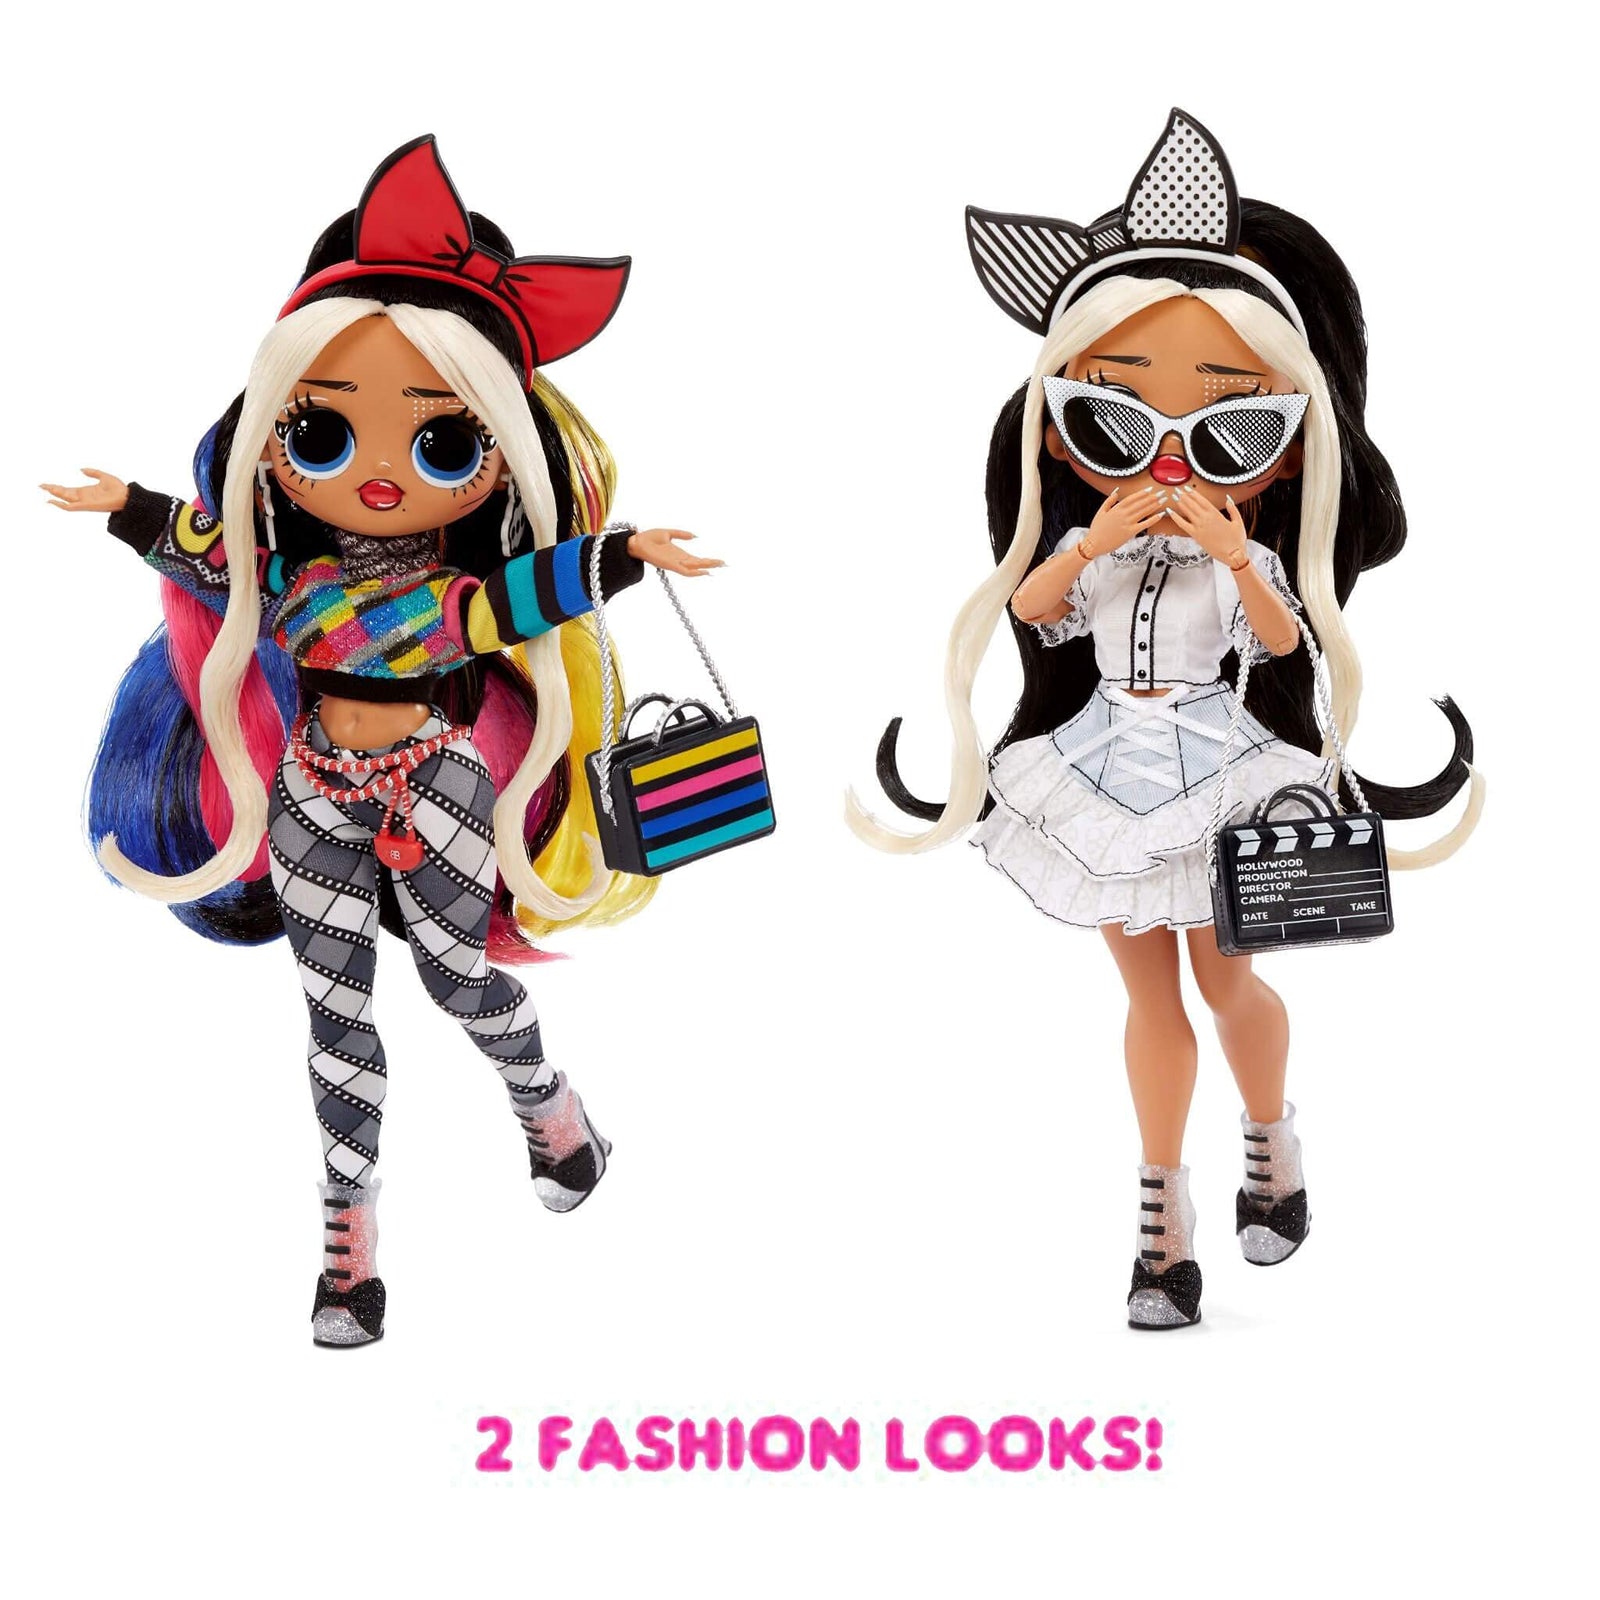 LOL Surprise OMG Movie Magic Starlette Fashion Doll with 25 Surprises Including 2 Outfits, 3D Glasses, Movie Accessories, Reusable Playset– Gift for Kids, Toys for Girls Boys Ages 4 5 6 7+ Years Old